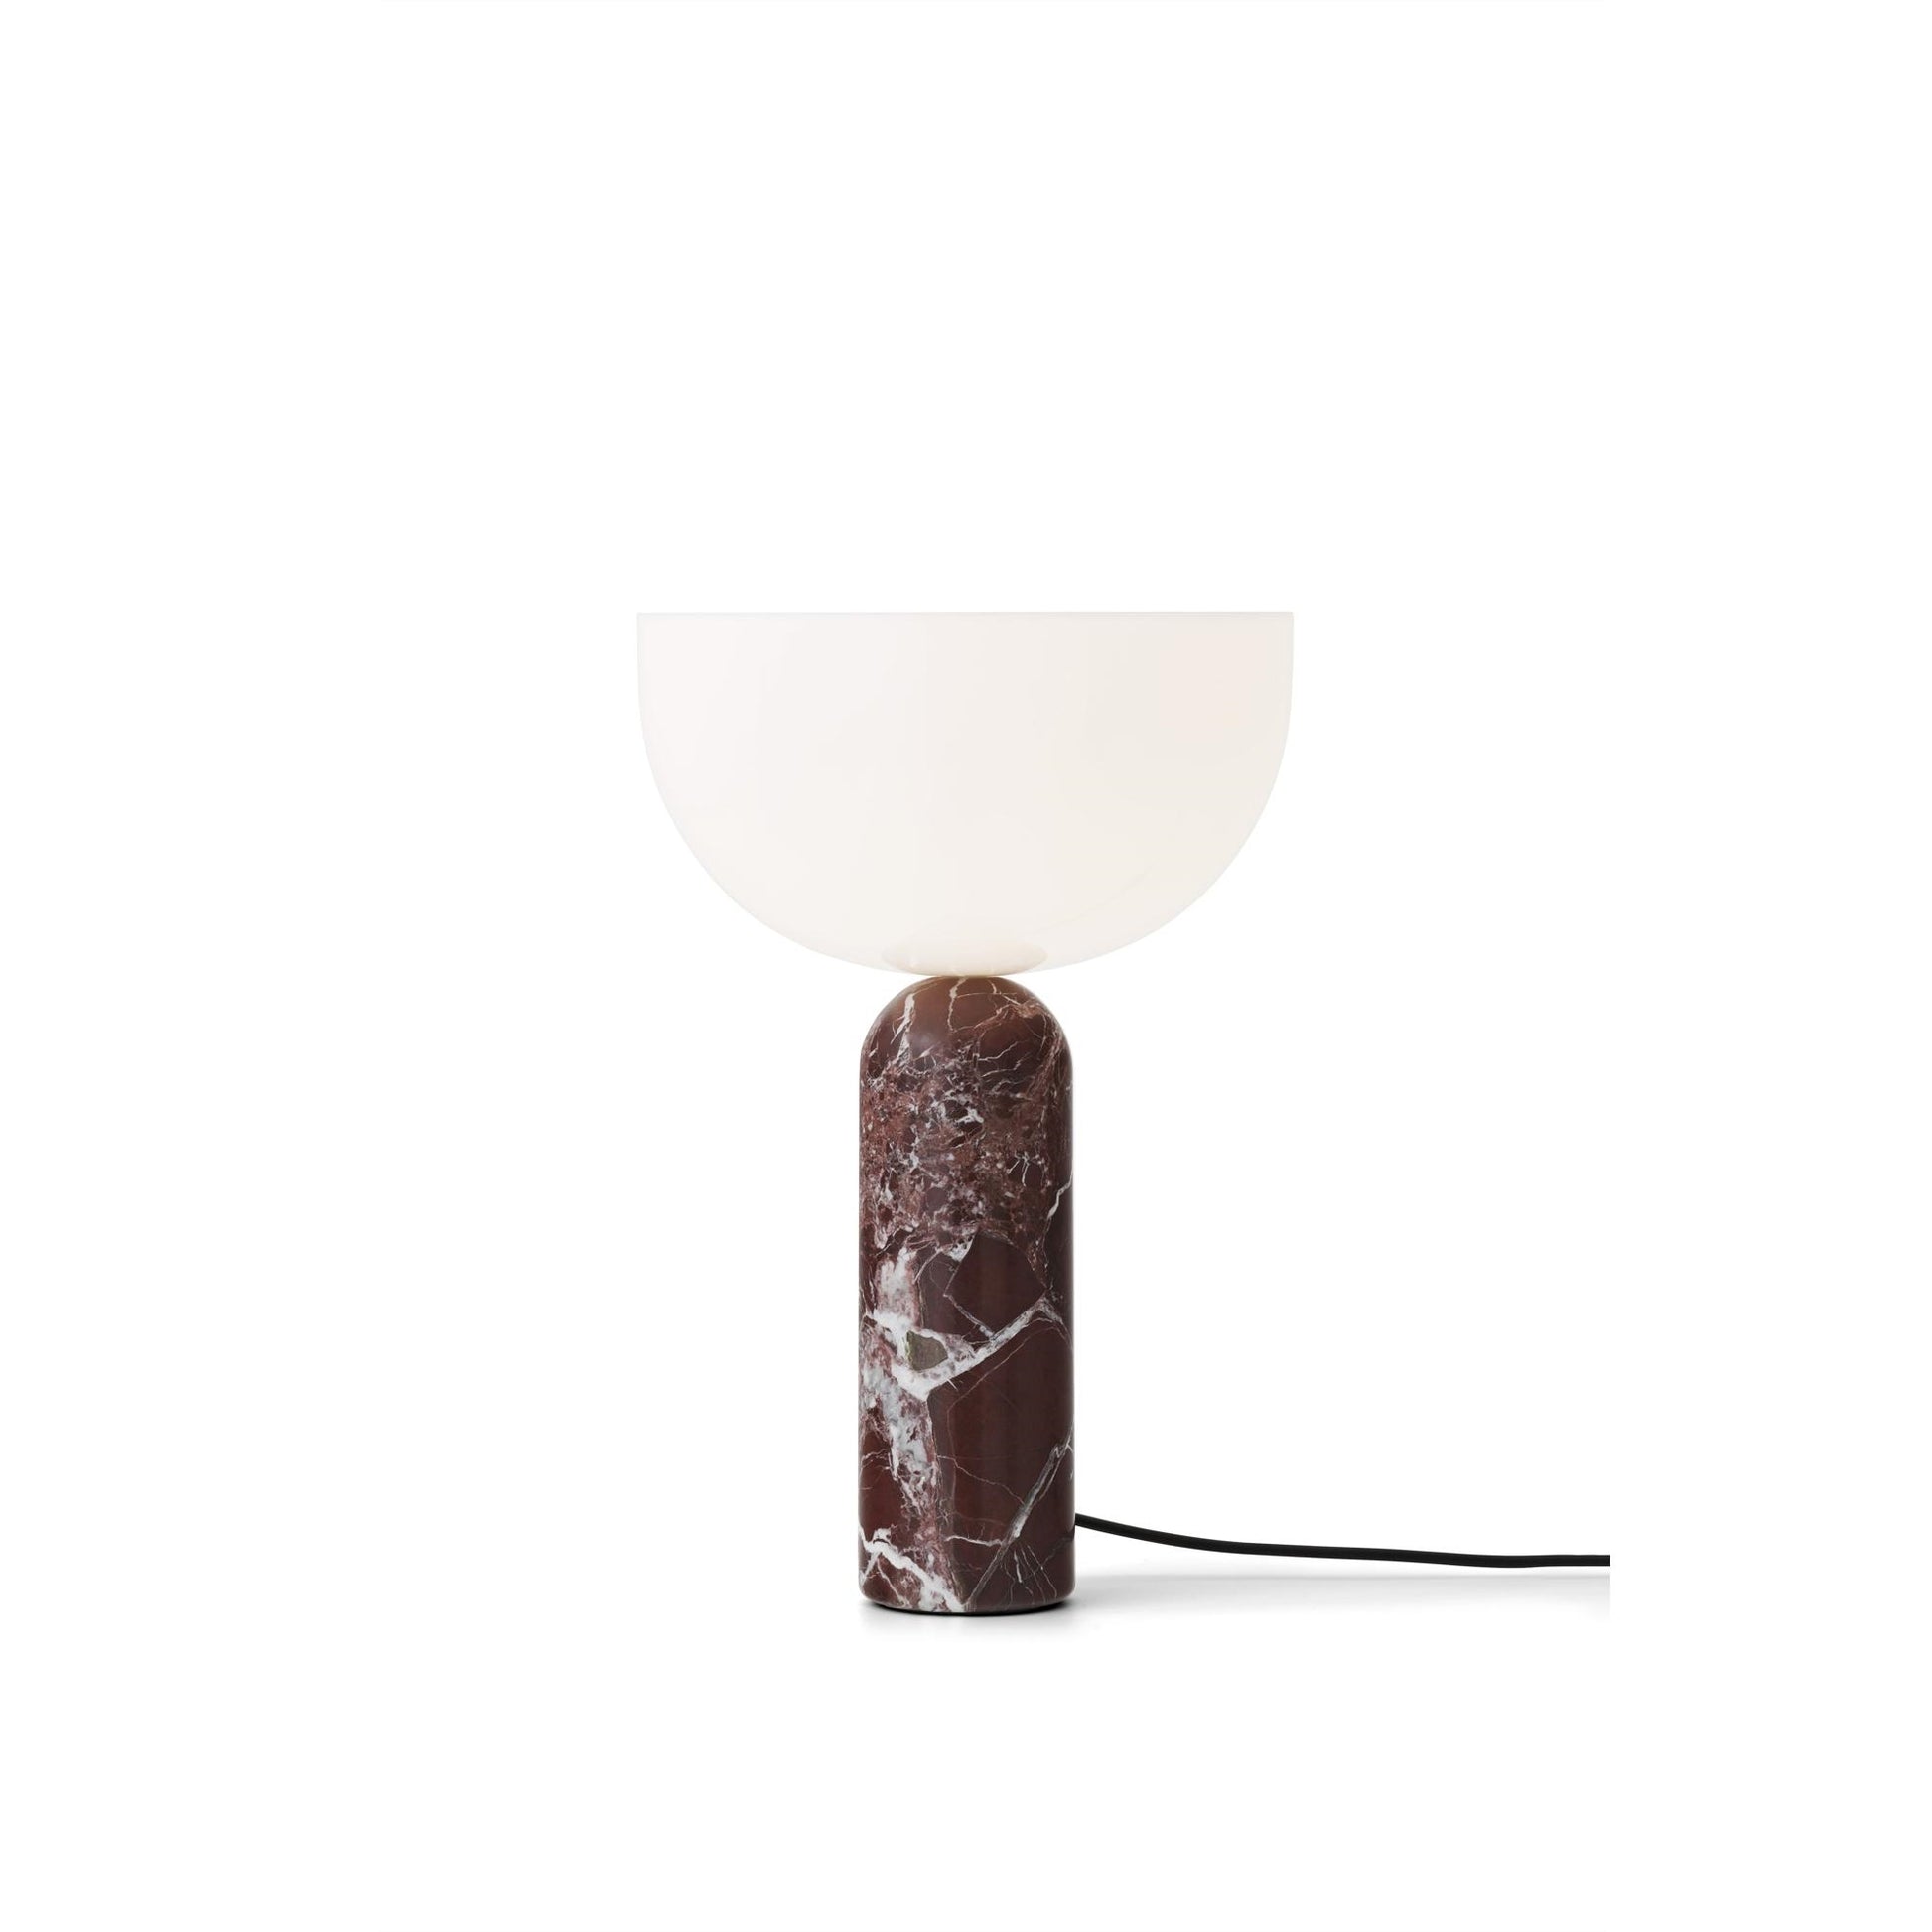 Kizu Table Lamp Big by NEW WORKS #Rosso Levanto